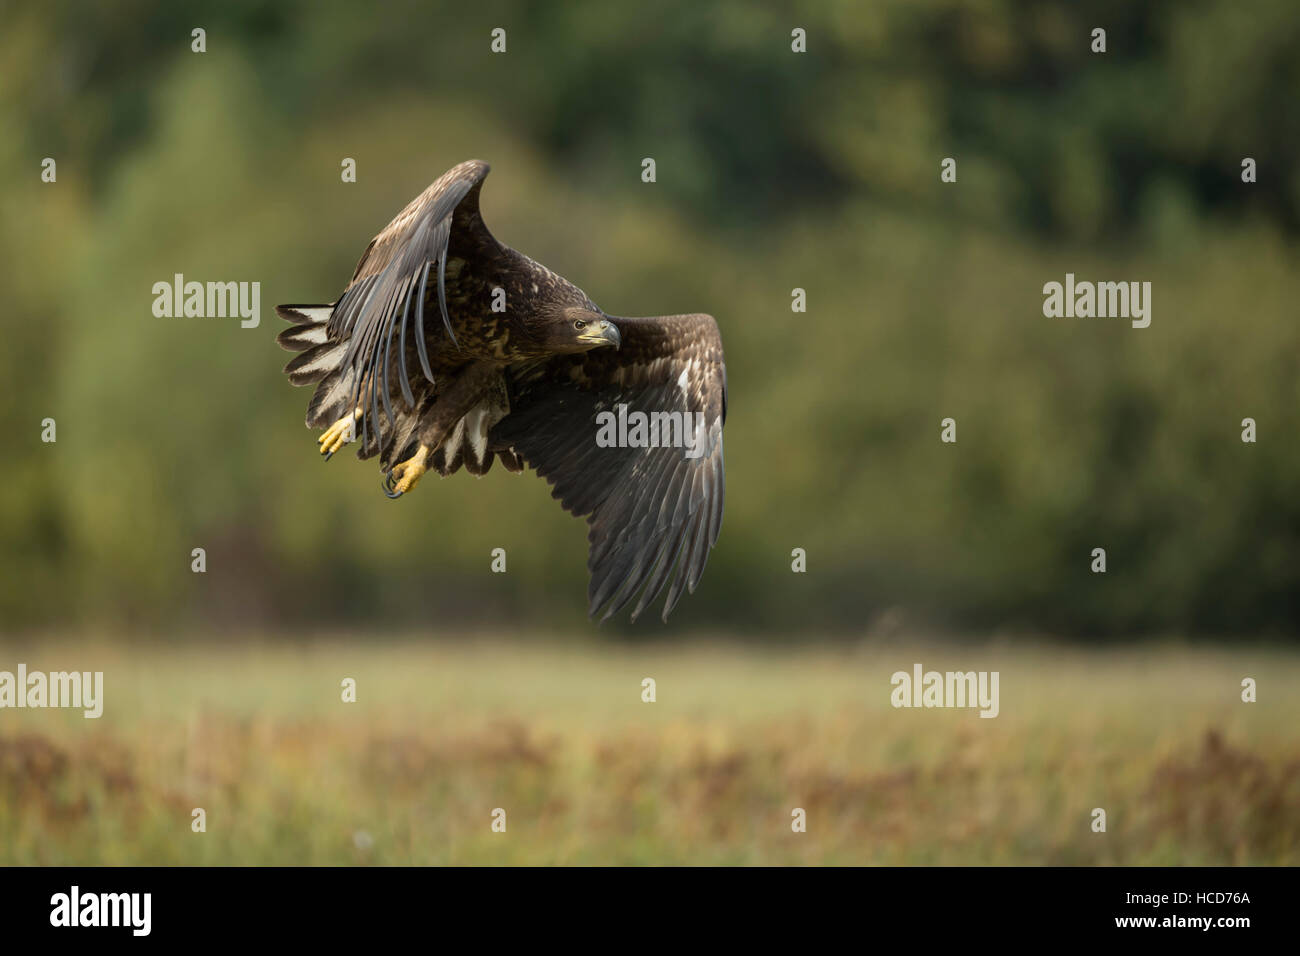 White tailed Eagle / Sea Eagle ( Haliaeetus albicilla ), young, taking off, in powerful flight in front of the edge of a forest. Stock Photo